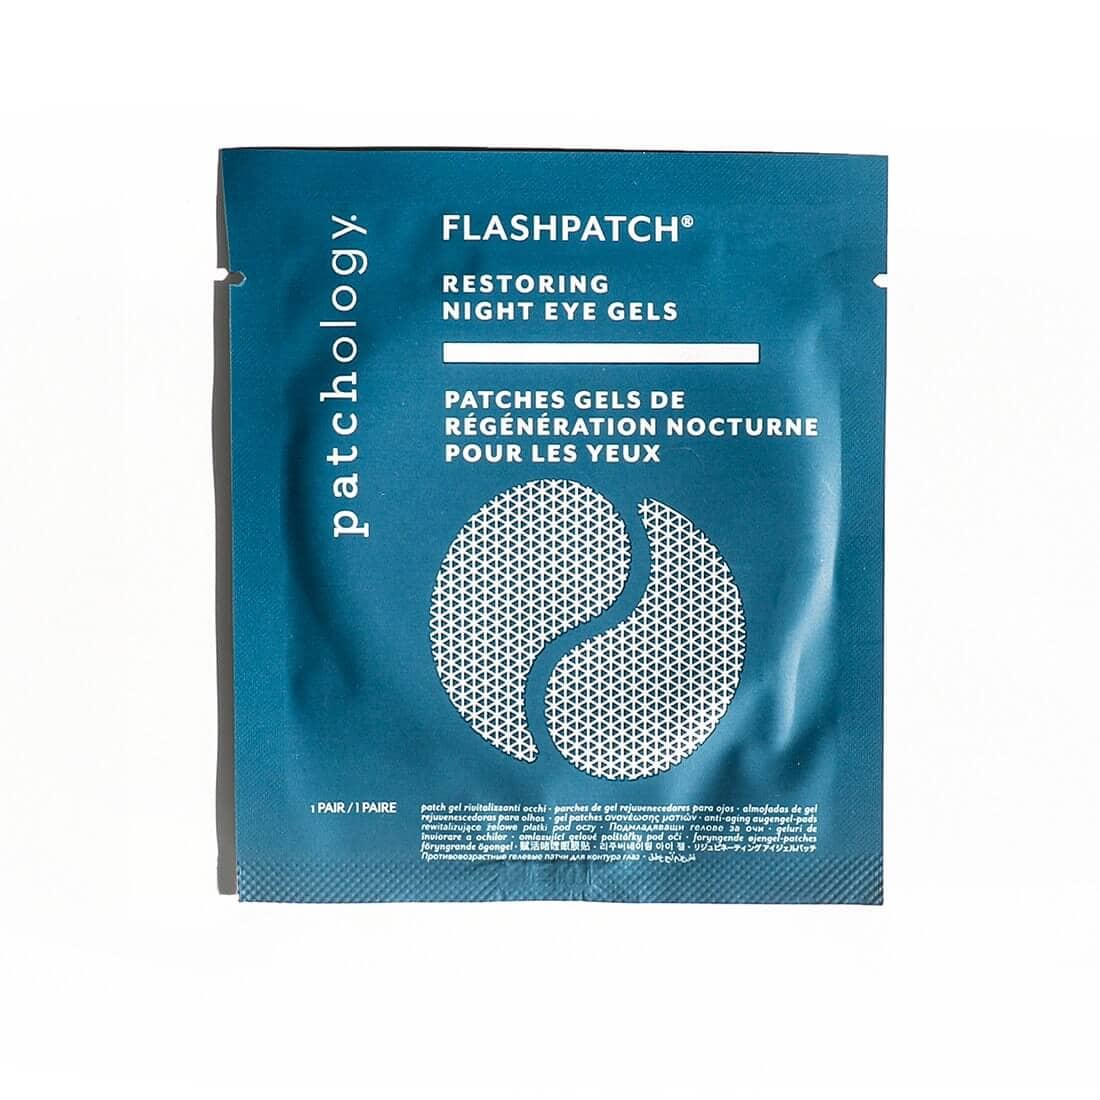 Patchology Under Eye Patches Set for Women and Men, Eye Gel Patches with  Collage